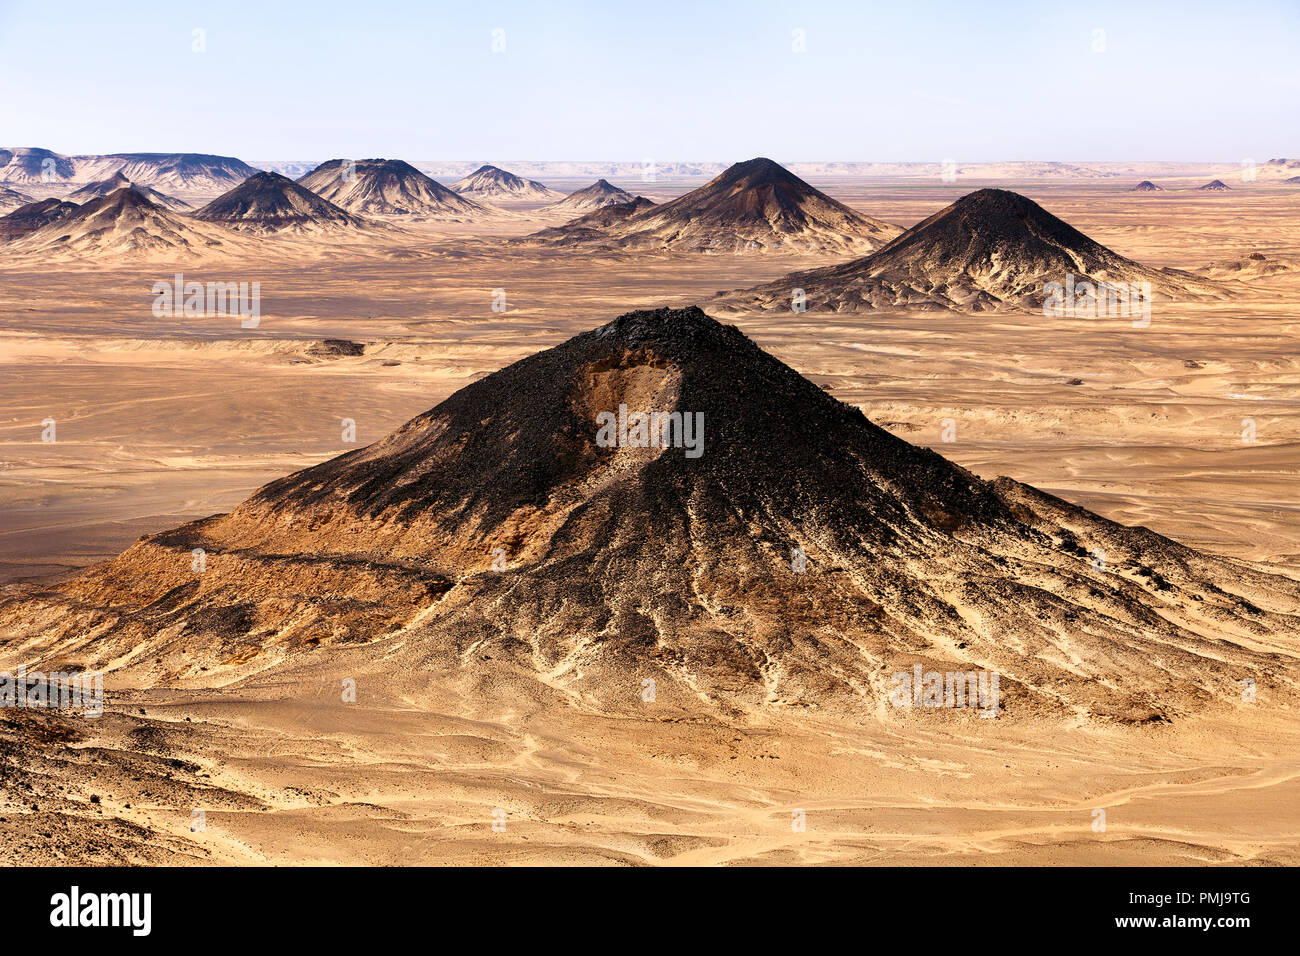 View of mountains of the Black Desert near Baharia oasis in the Sahara desert of central Egypt Stock Photo